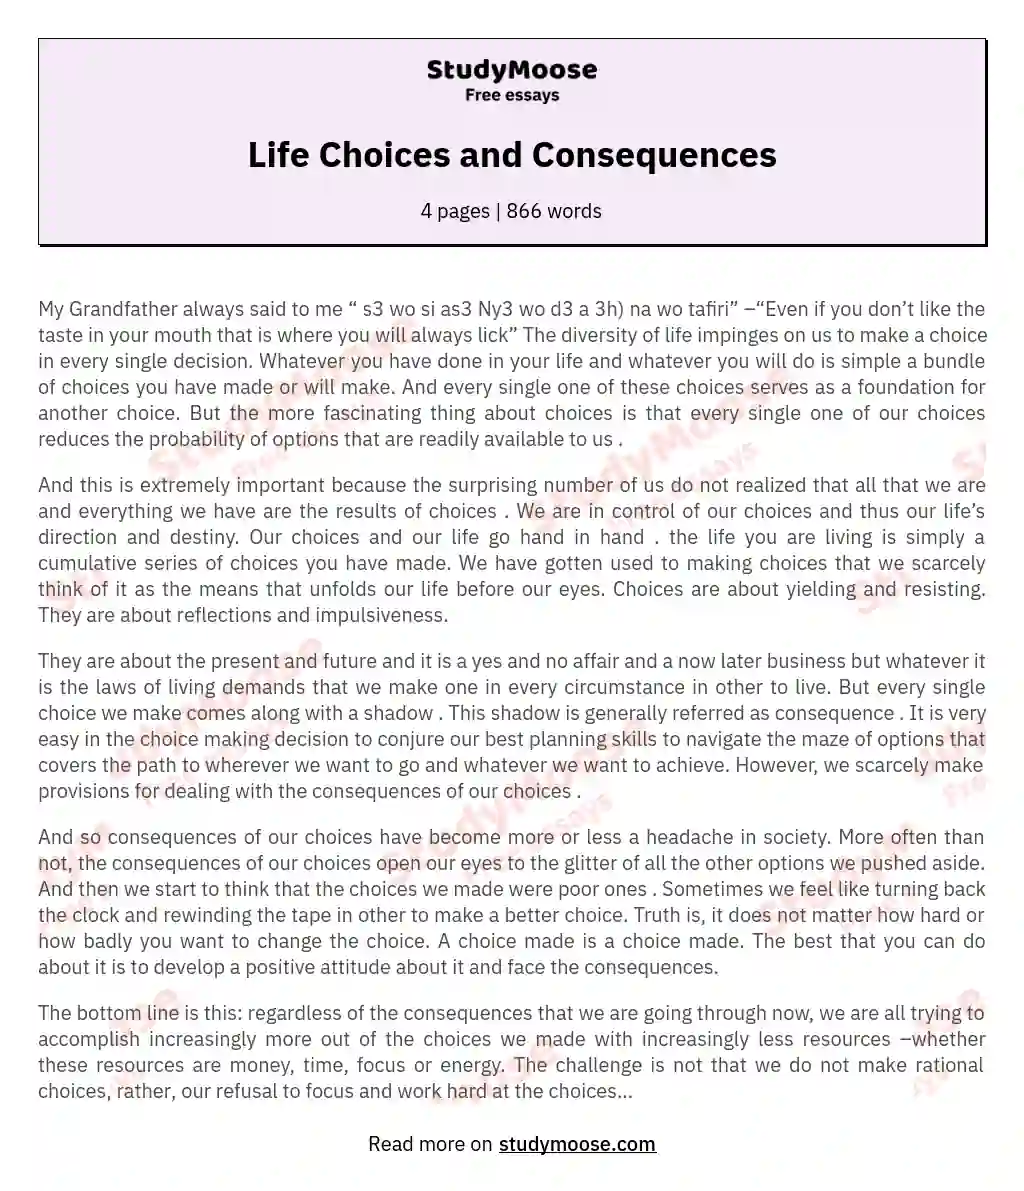 Life Choices and Consequences essay